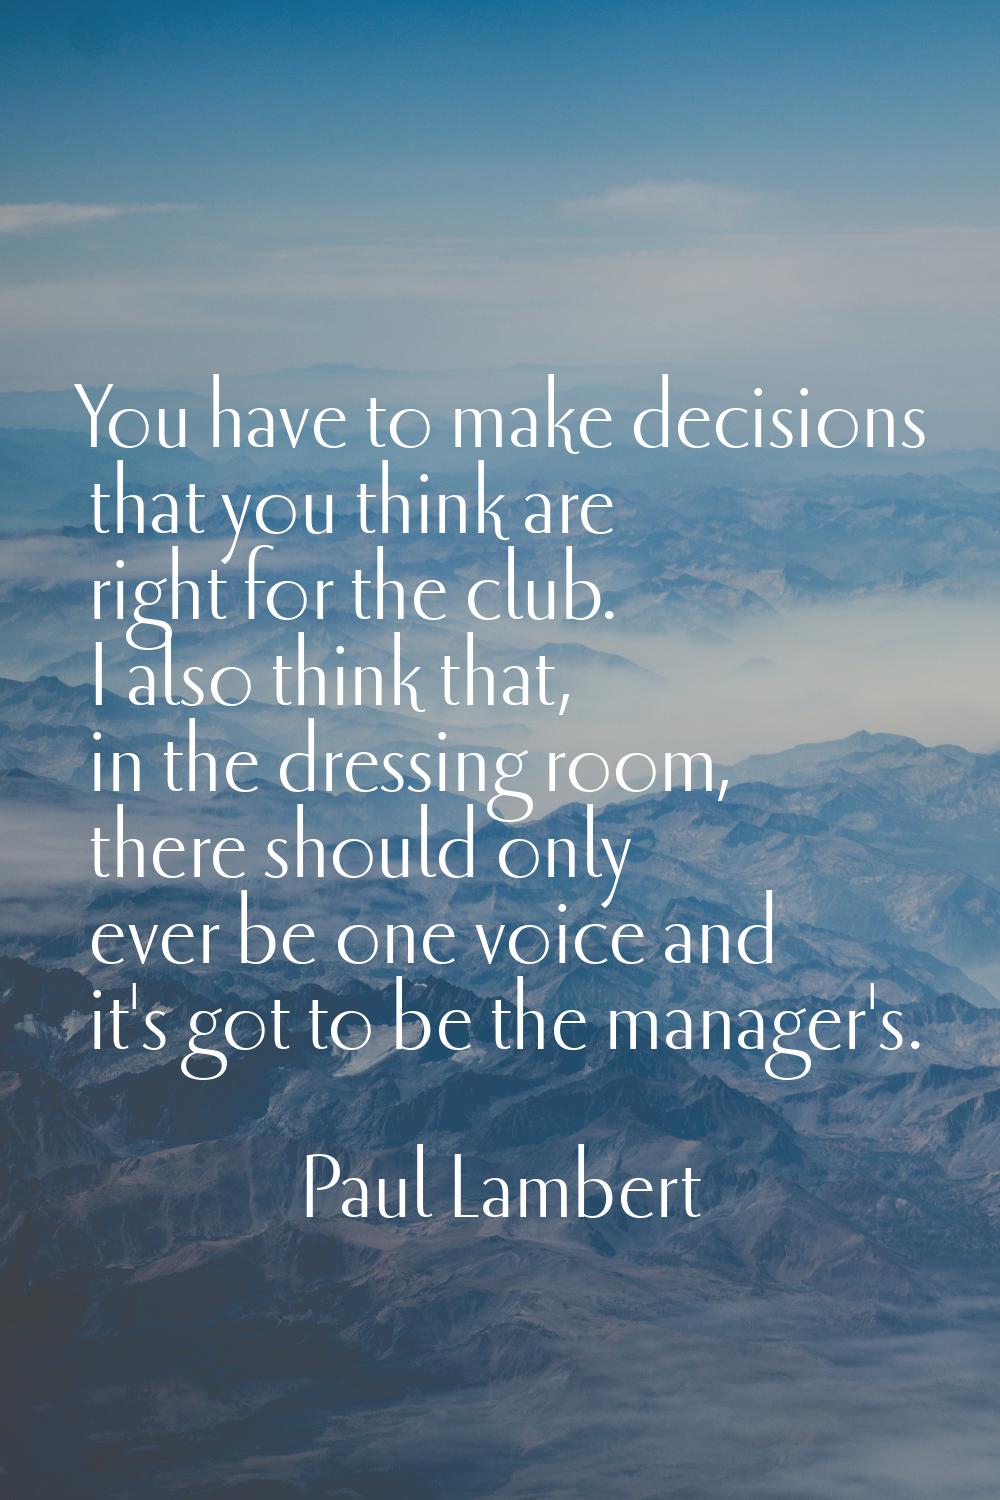 You have to make decisions that you think are right for the club. I also think that, in the dressin